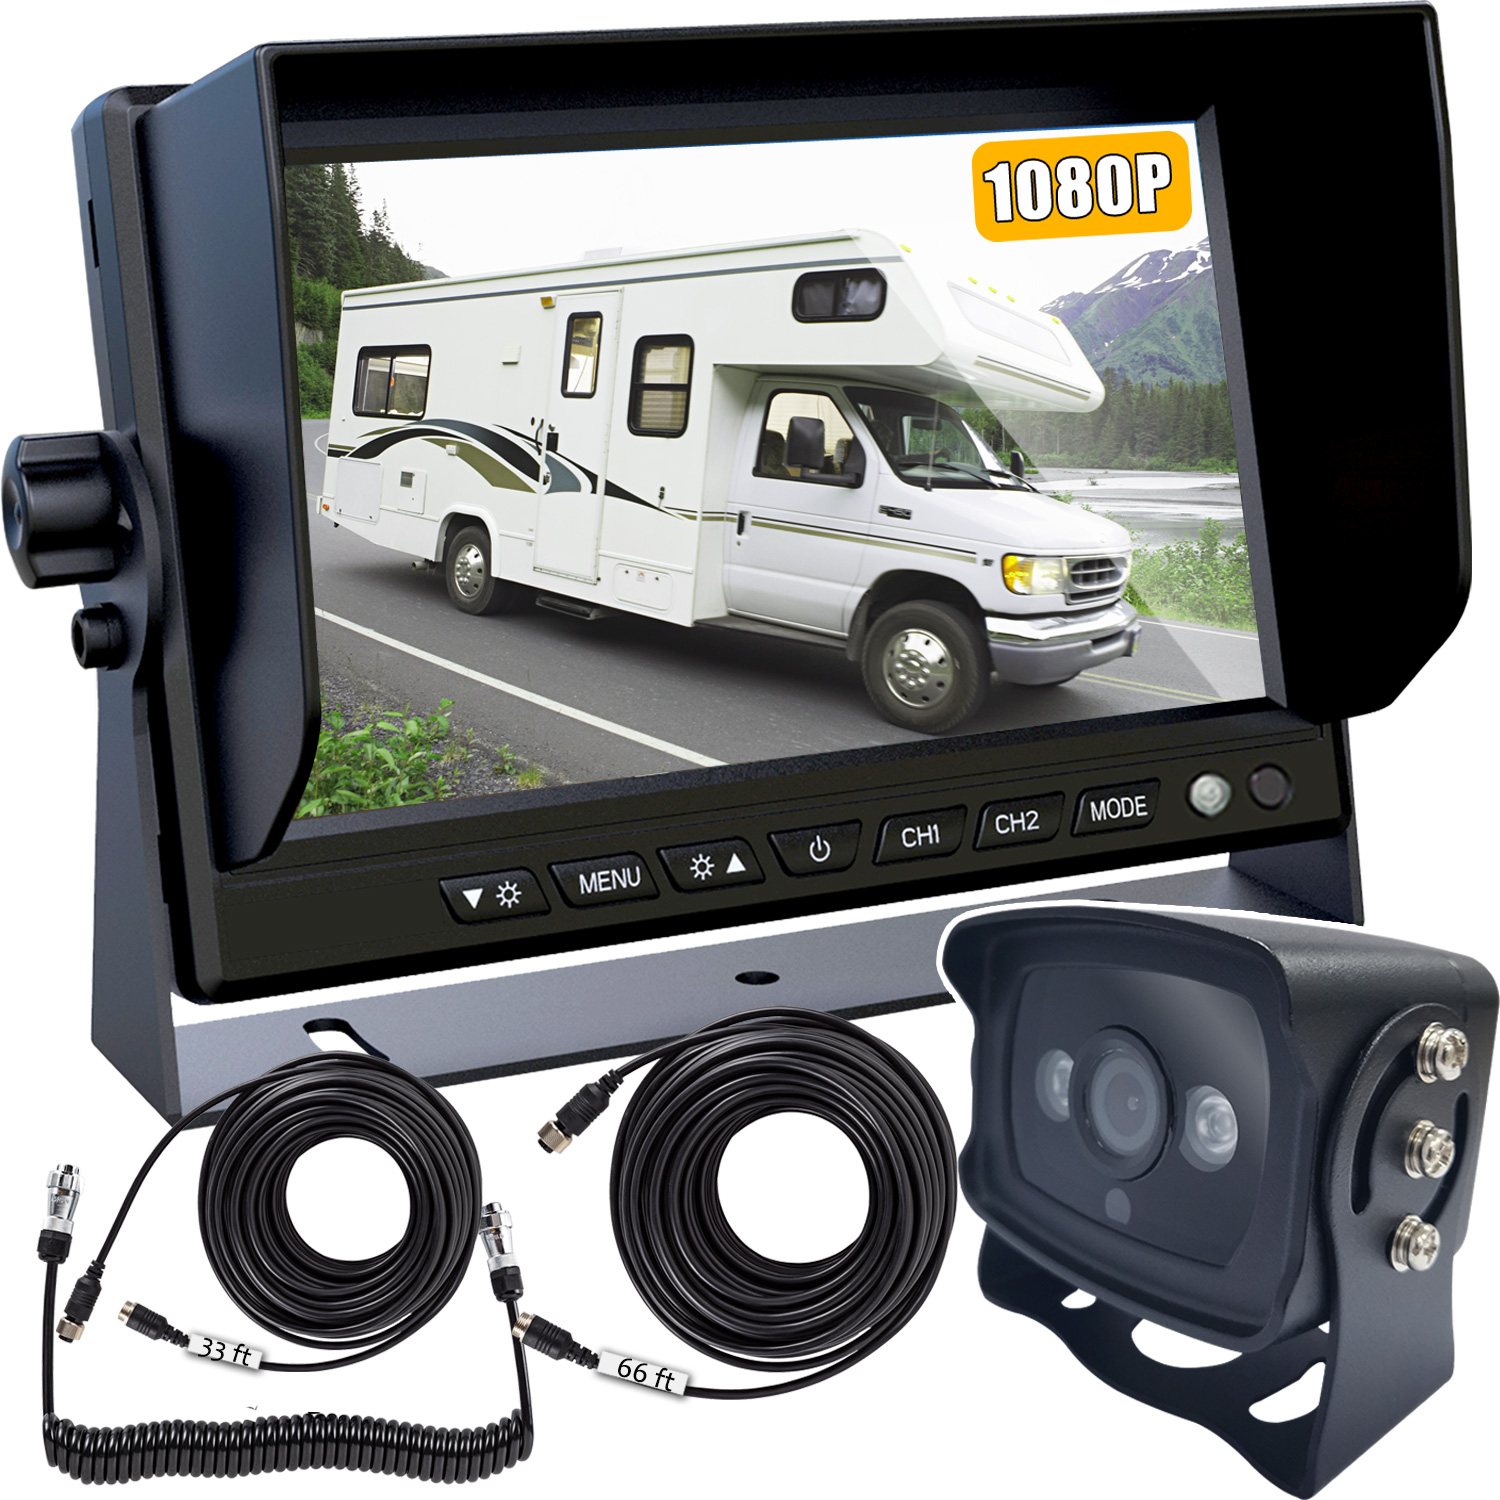 Backup Camera Kit for RVs Trailers Trucks, 7 Inch Wide Screen